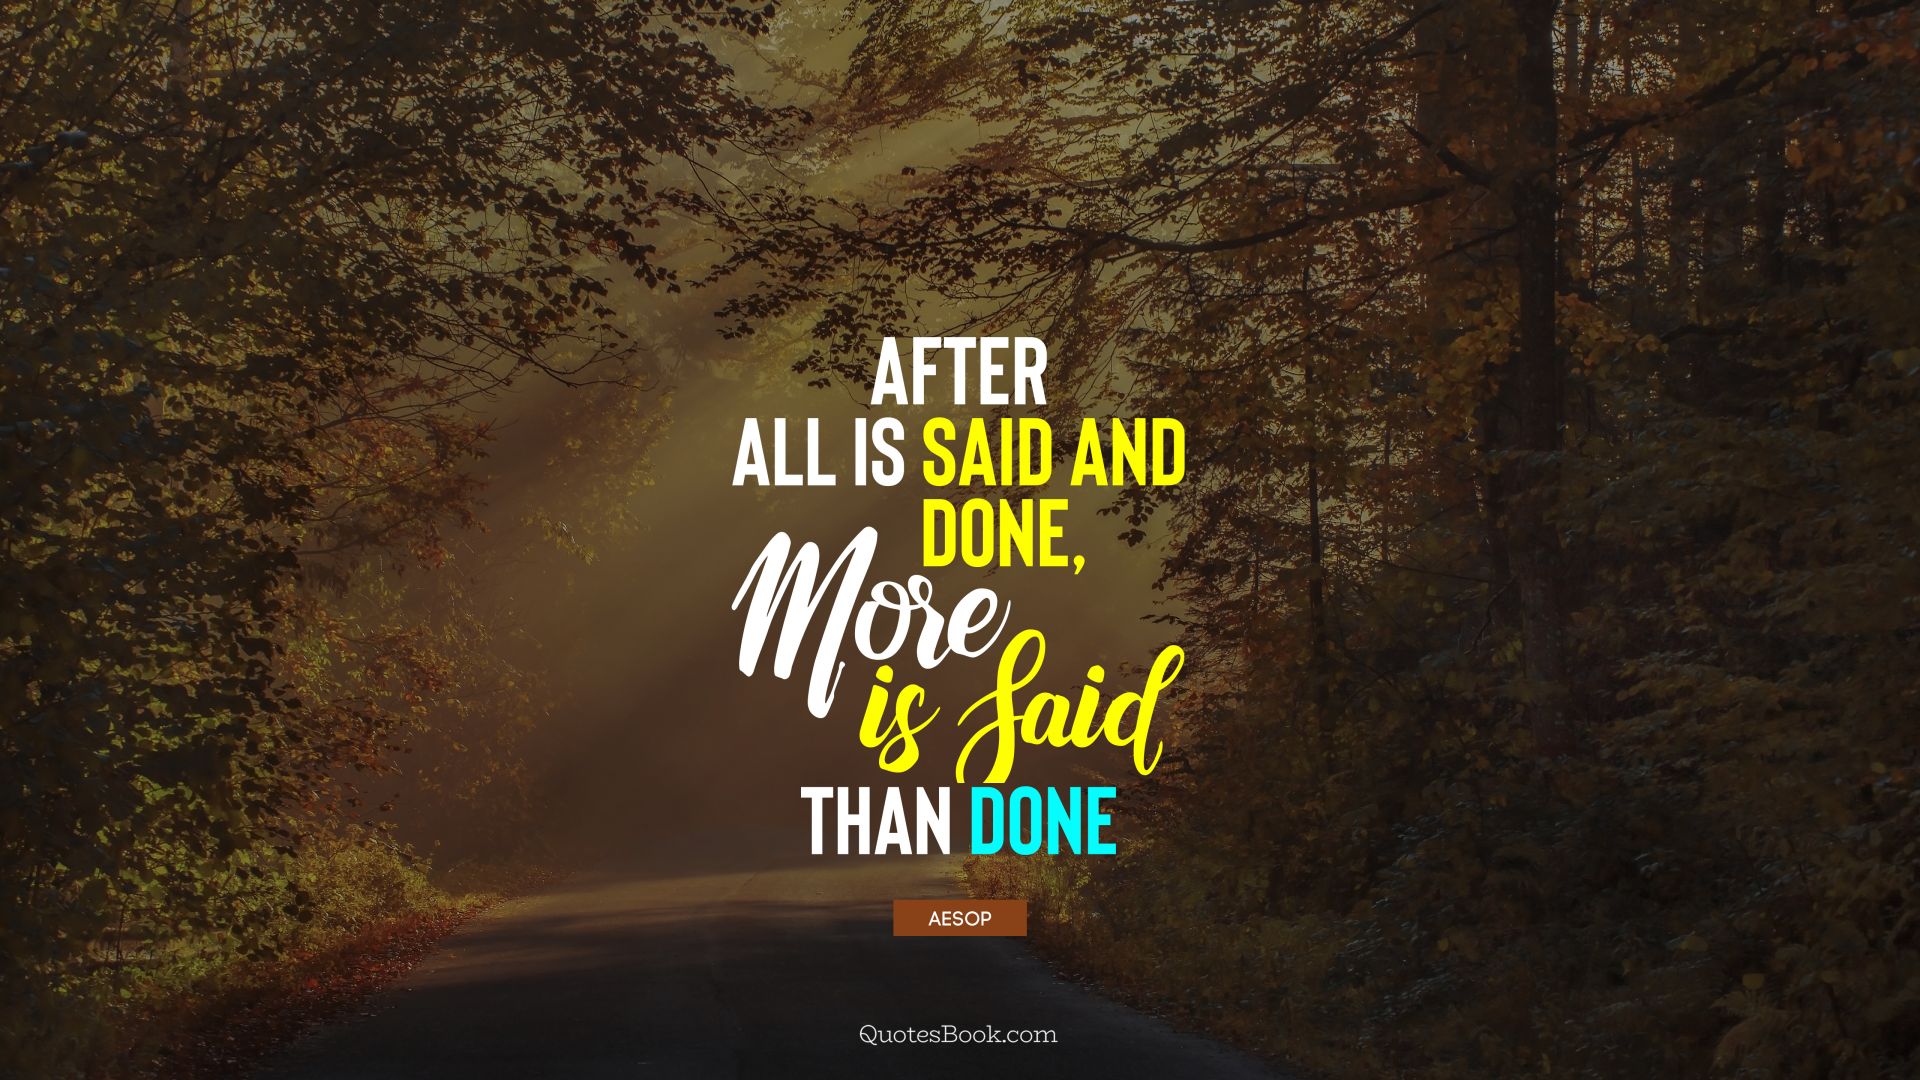 After all is said and done, more is said than done. - Quote by Aesop